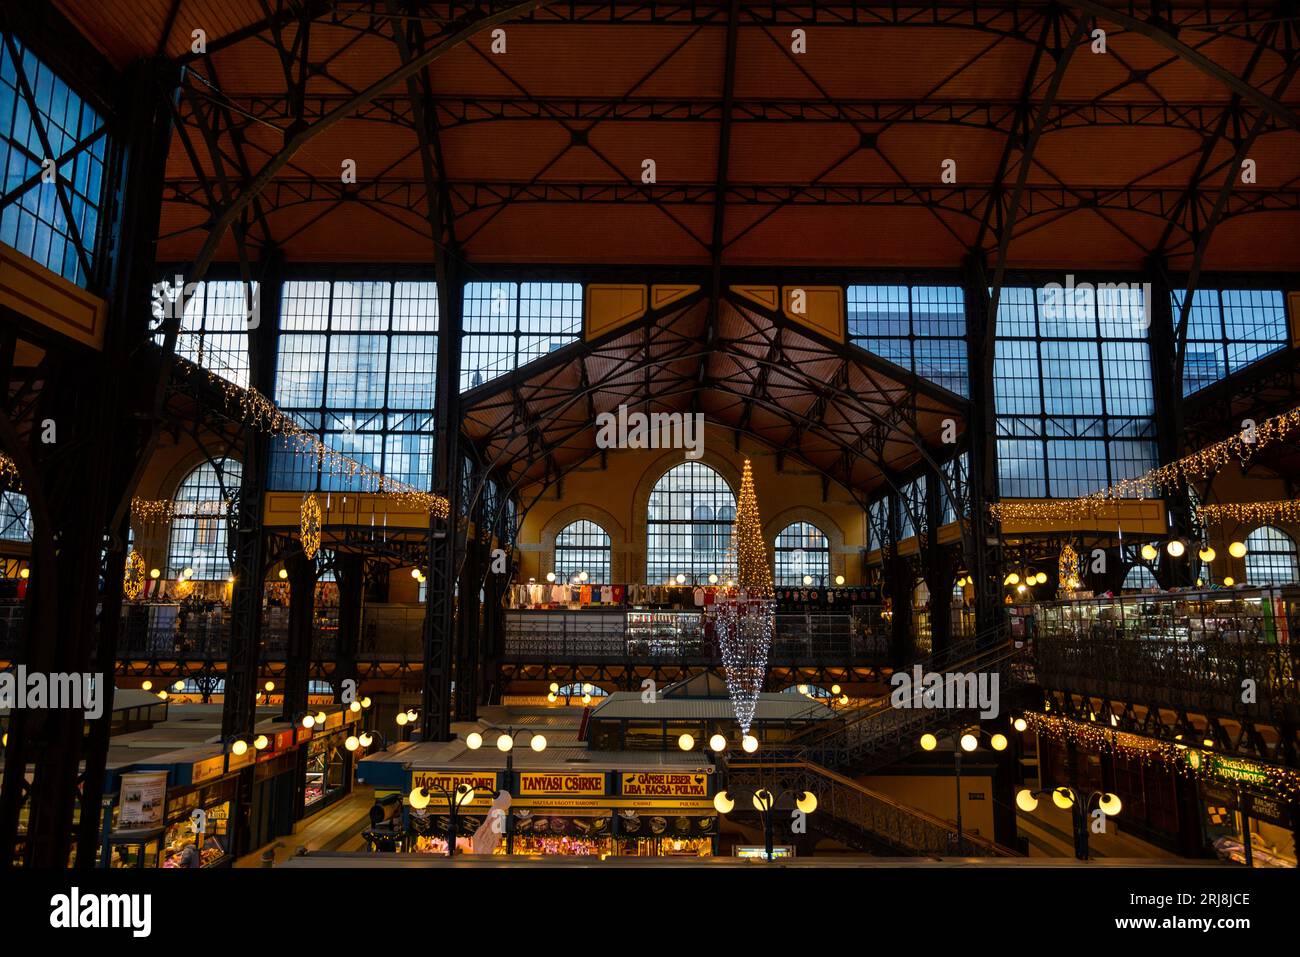 Great Market Hall in Budapest, Hungary. Stock Photo